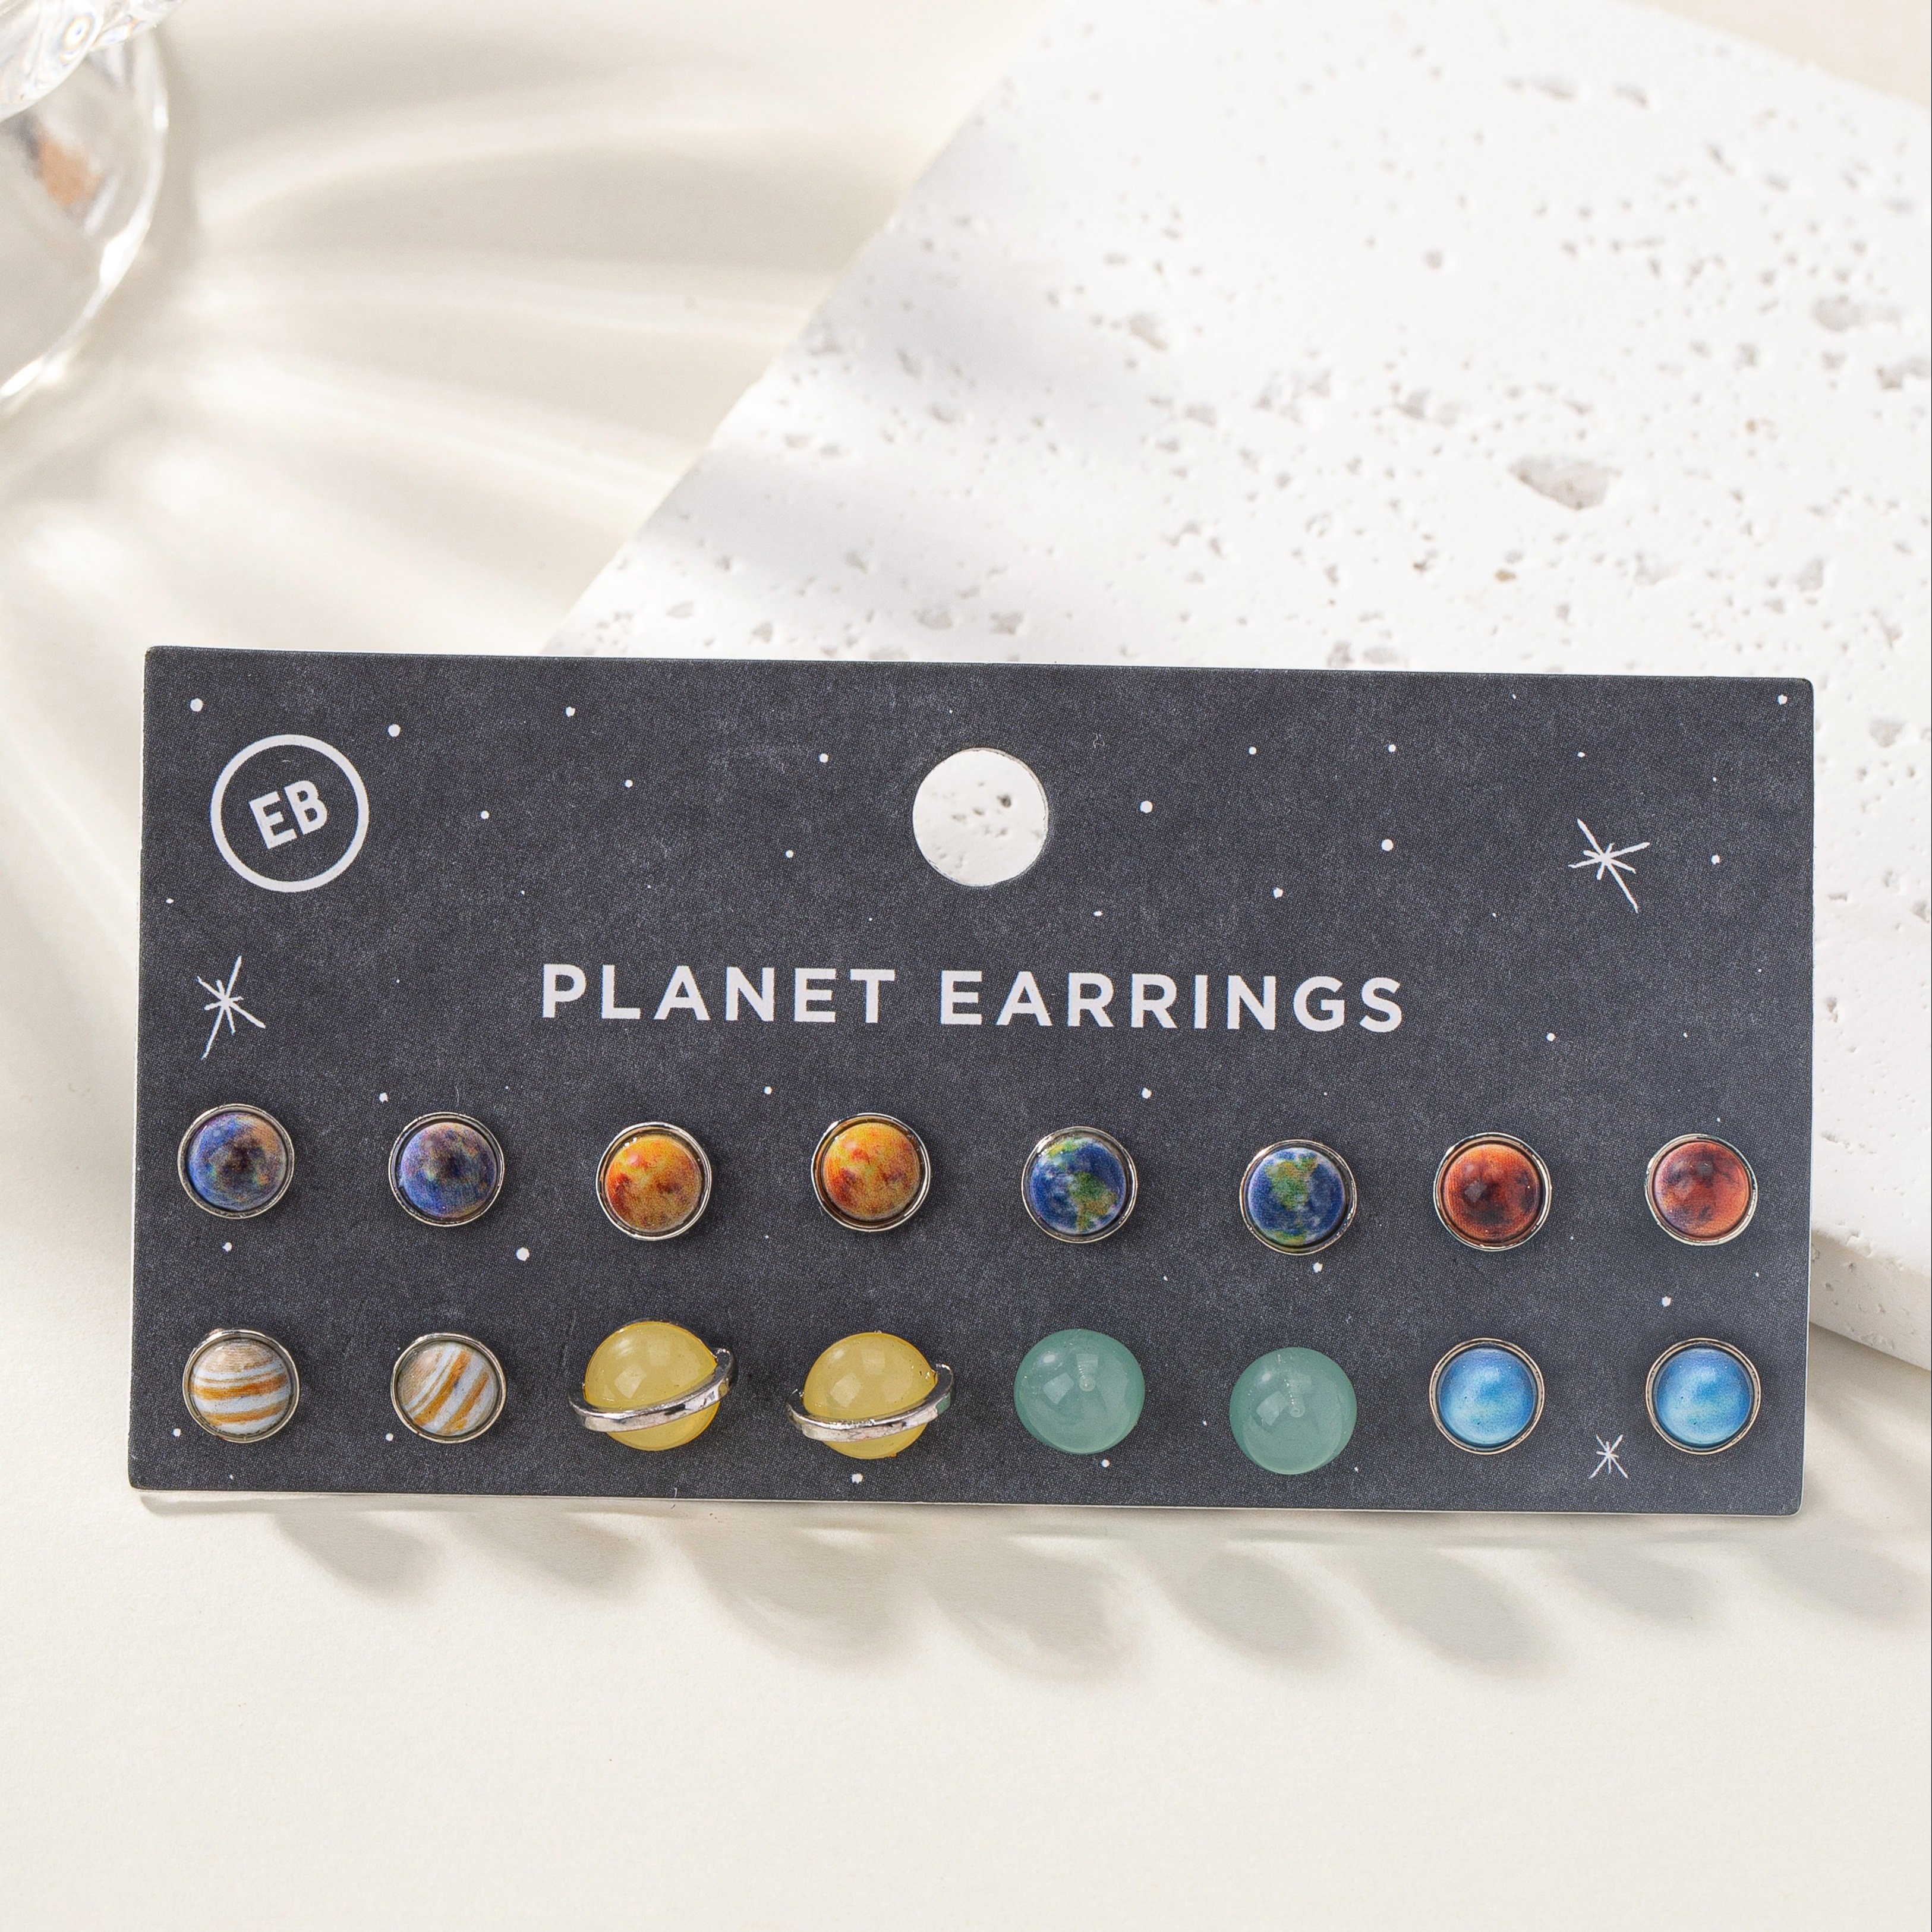 

Planet Earrings Set - 8 Pairs Zinc Alloy Studs Featuring Solar System Design, No Mosaic, Versatile For Banquets & Festivals, Earth Day Collection For All Seasons